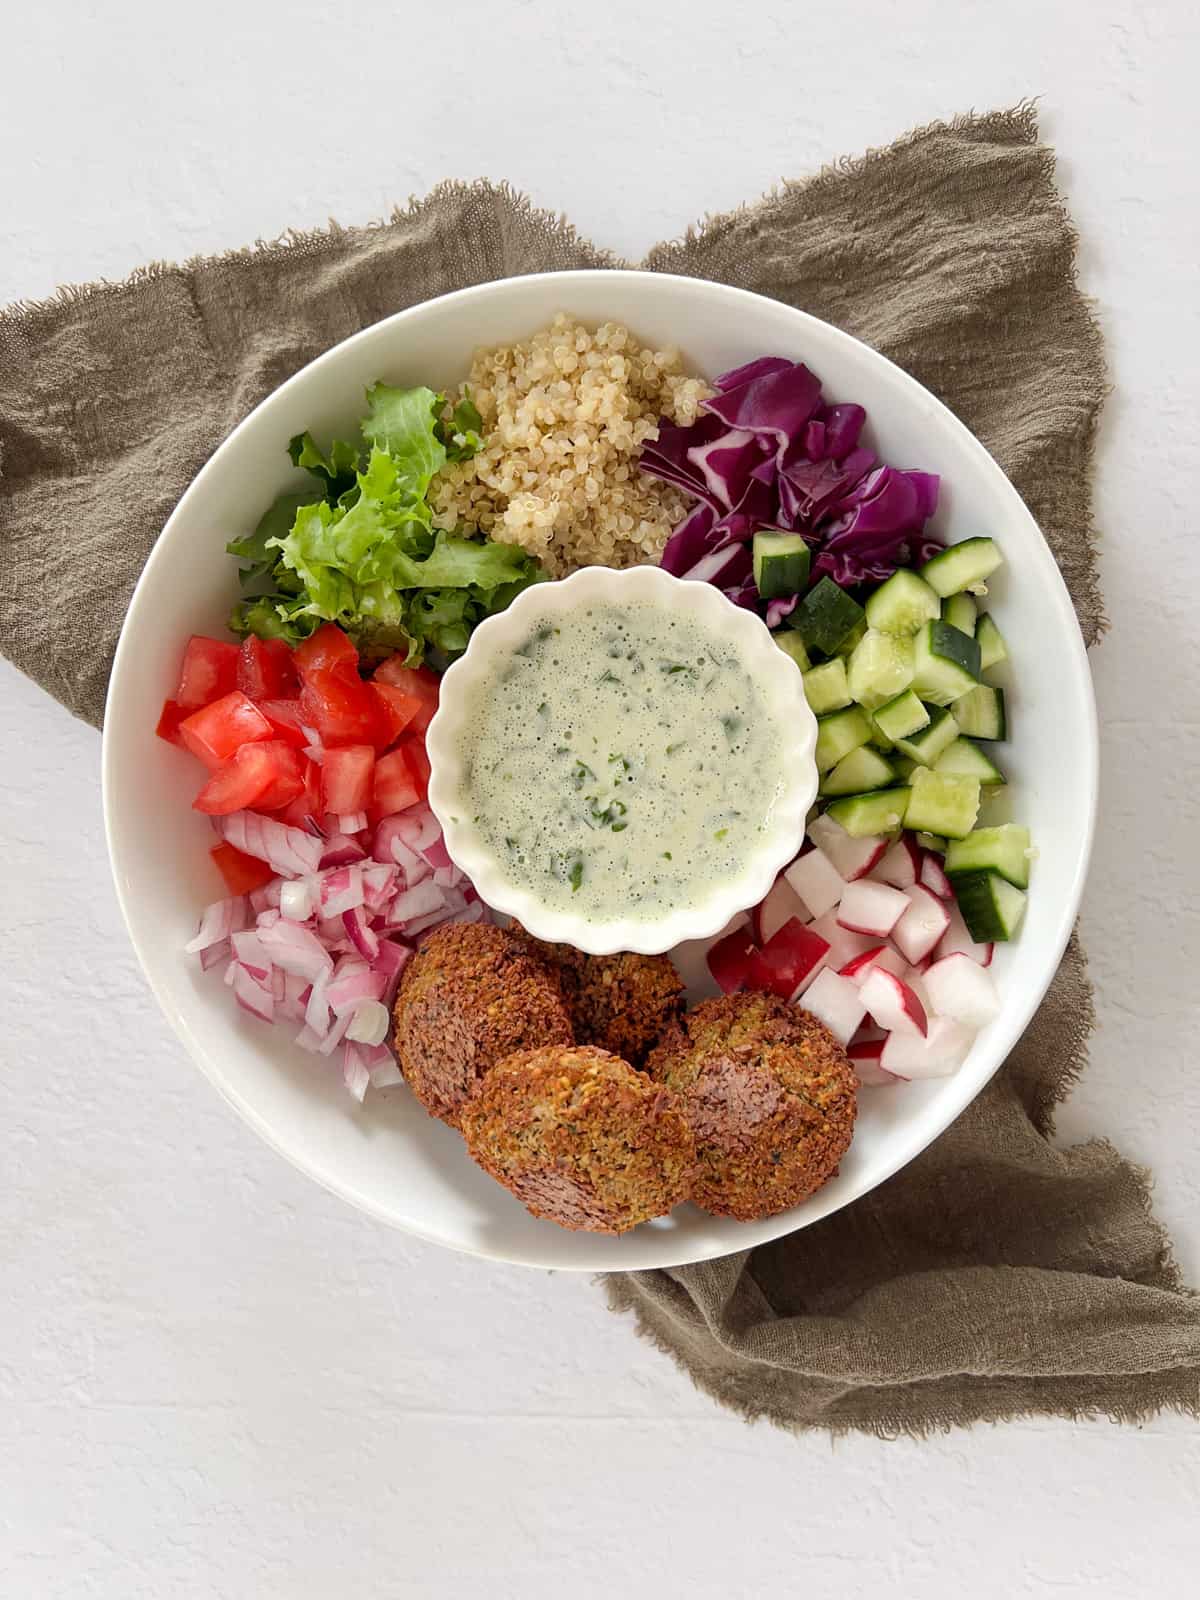 falafel balls, diced veggies and chopped lettuce in a plate with a bowl of lemon tahini dressing in the centre